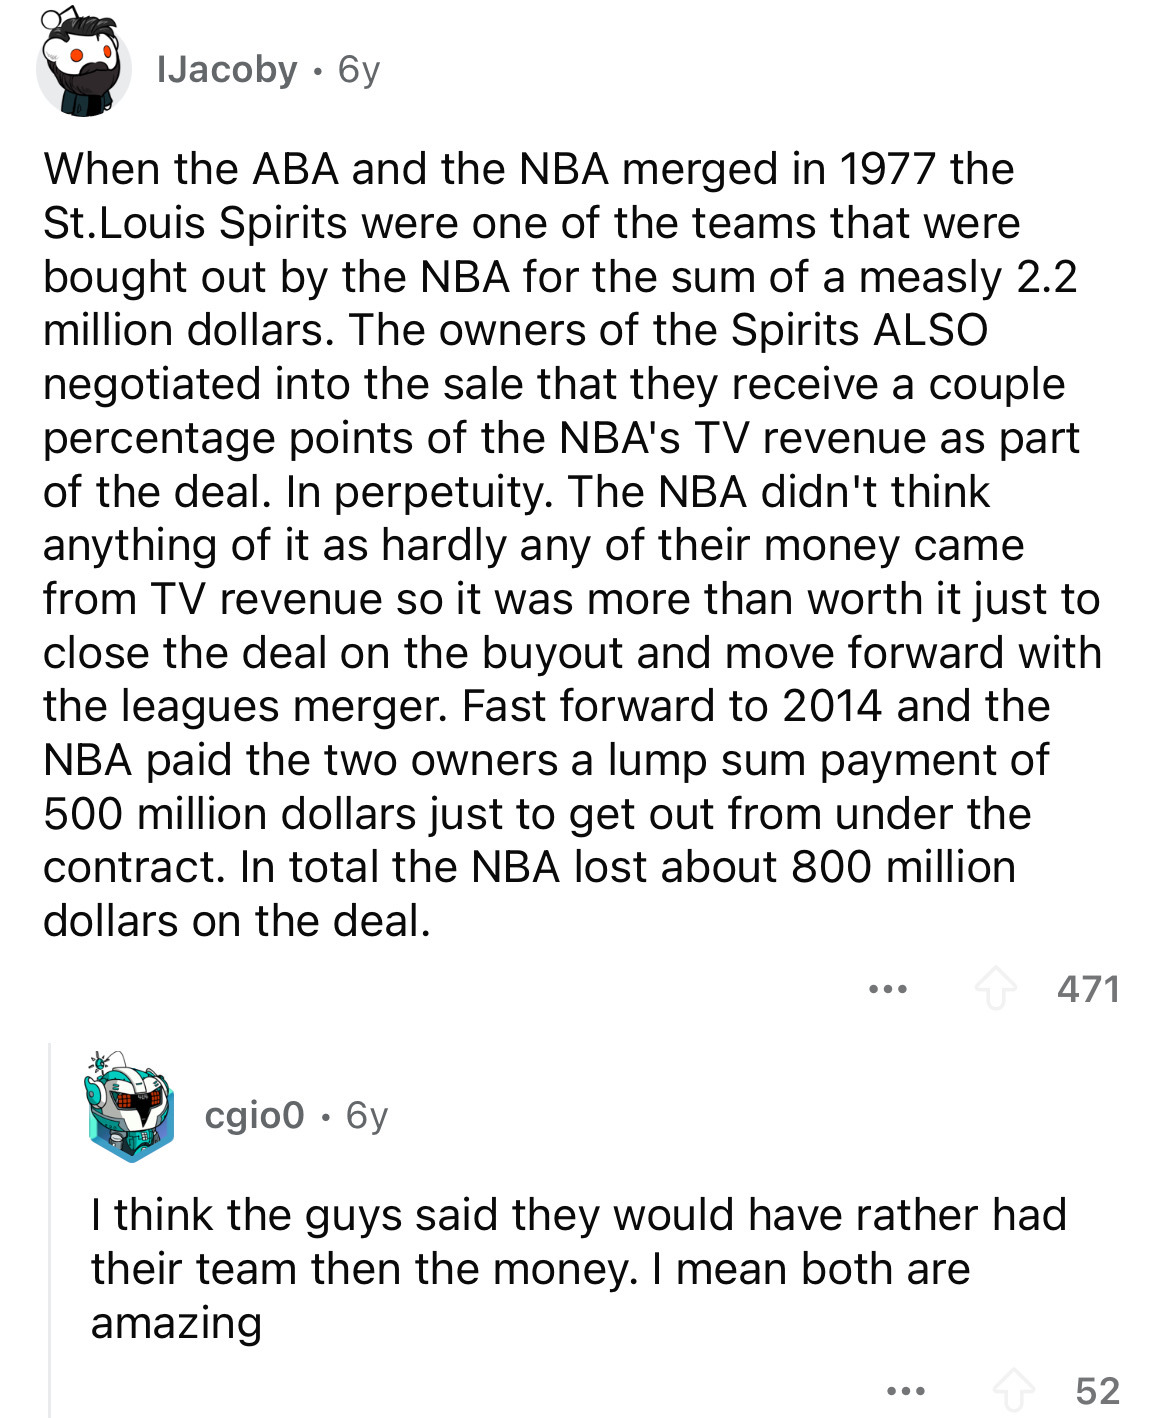 document - IJacoby 6y When the Aba and the Nba merged in 1977 the St.Louis Spirits were one of the teams that were bought out by the Nba for the sum of a measly 2.2 million dollars. The owners of the Spirits Also negotiated into the sale that they receive